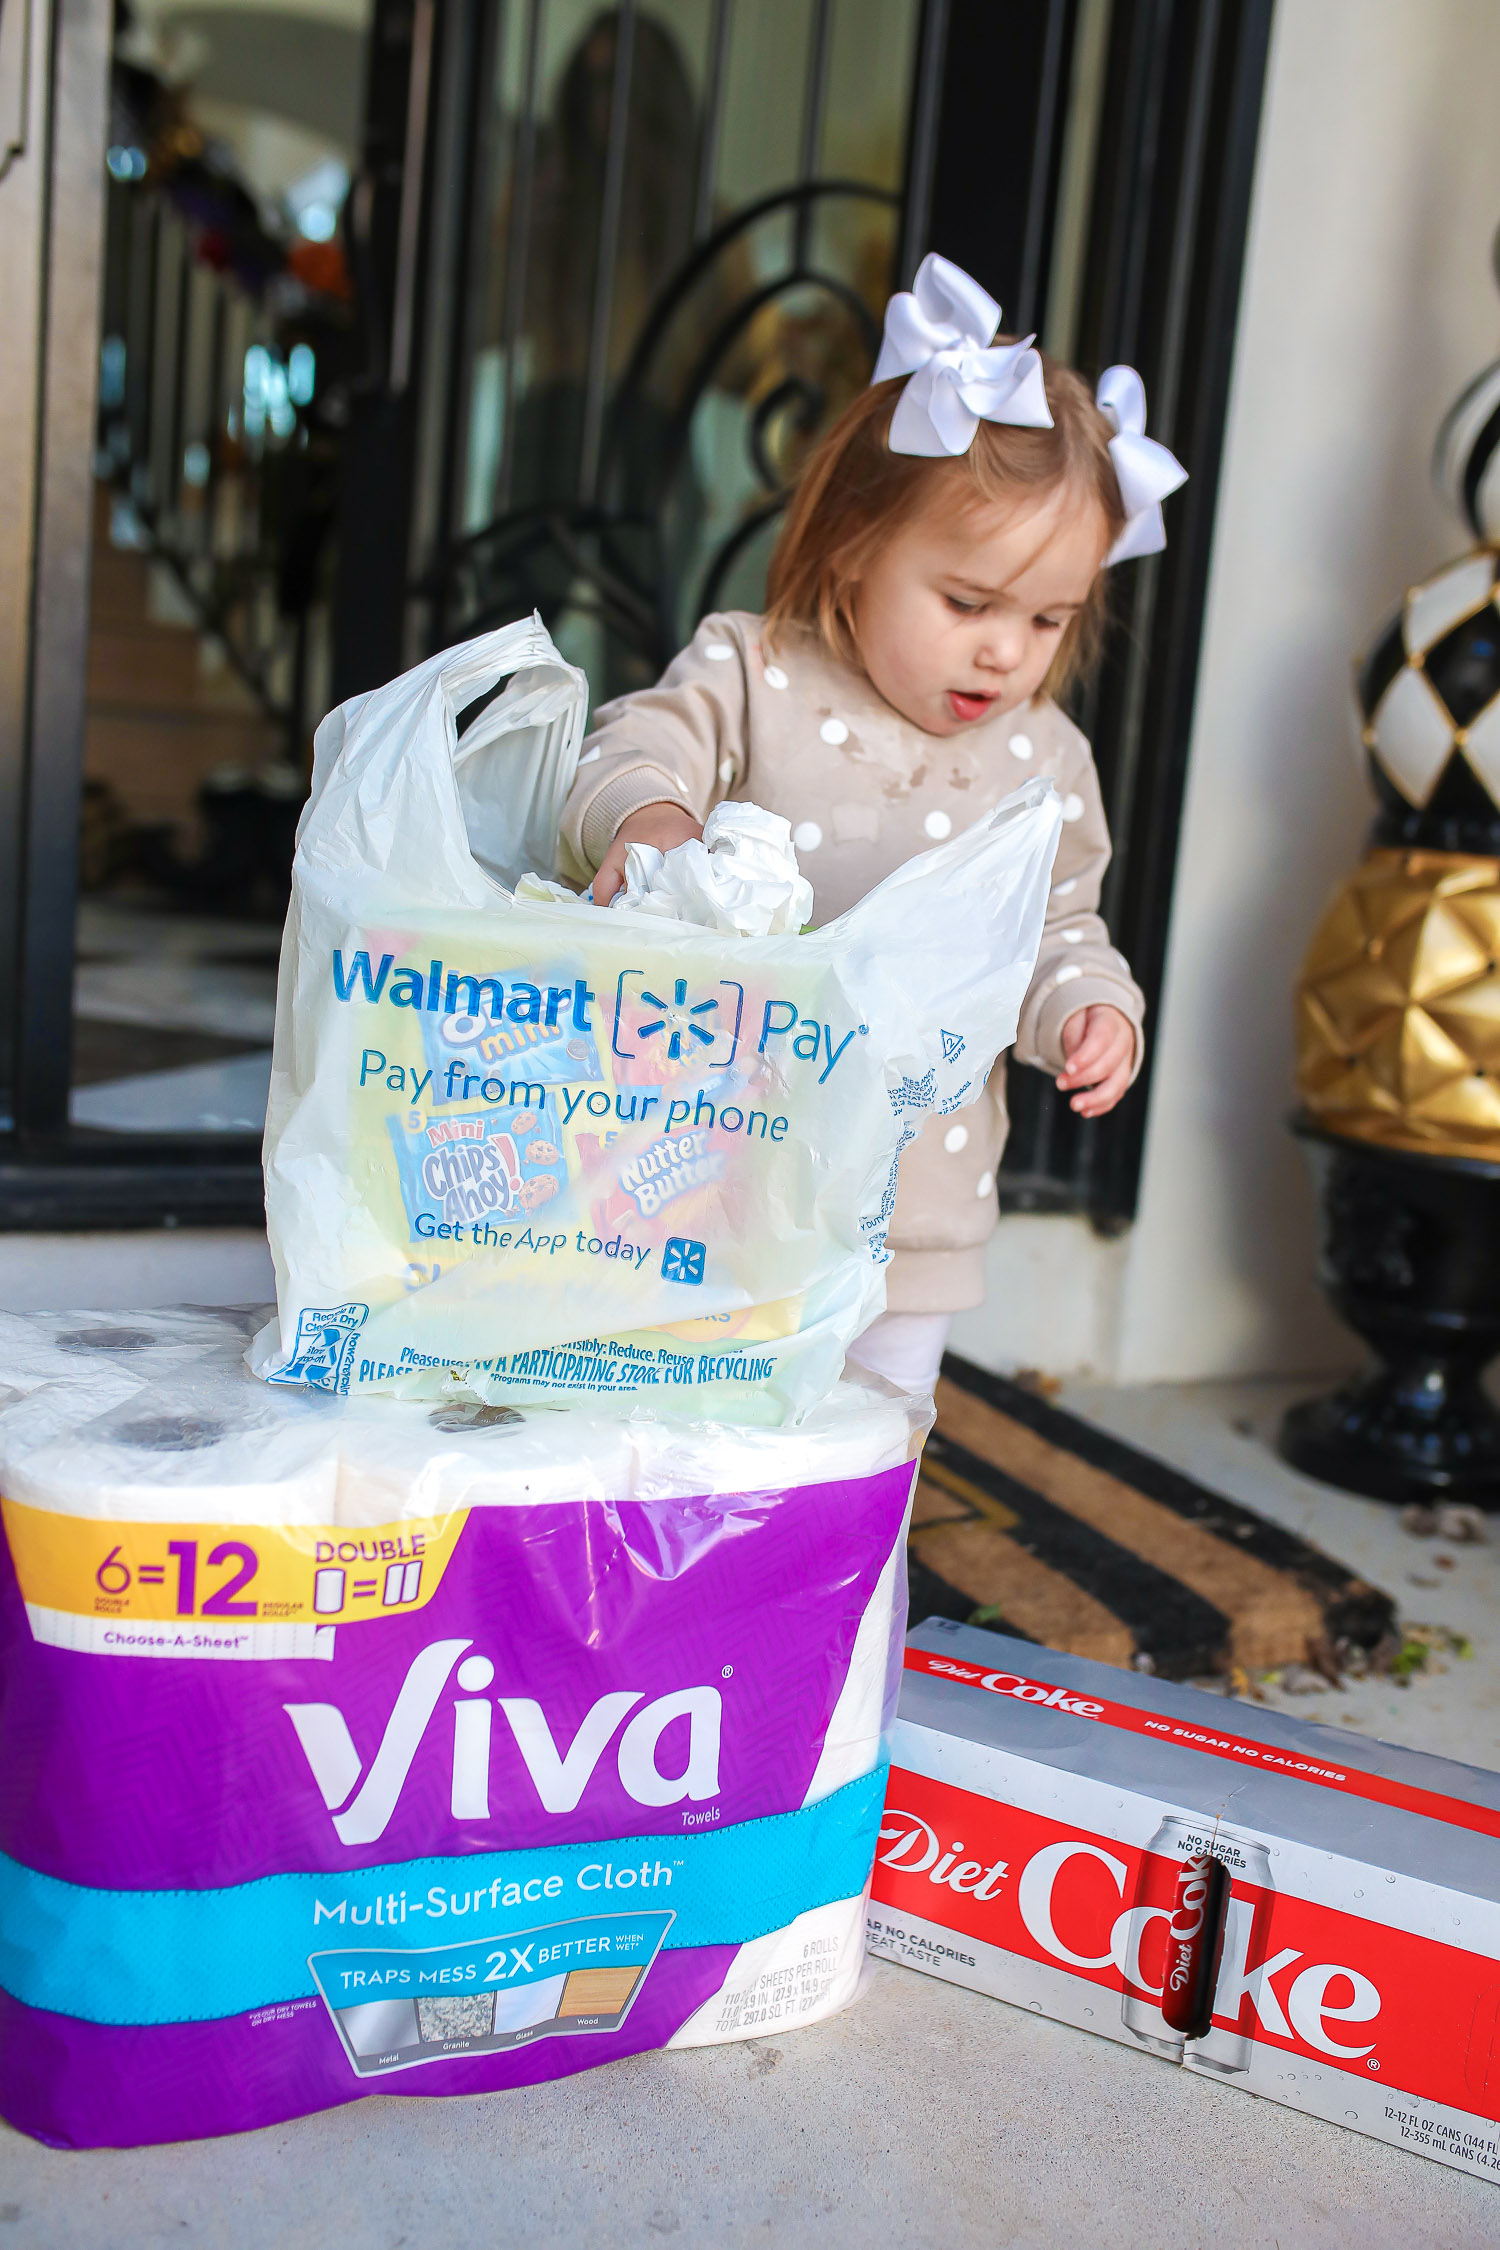 walmart online pickup and delivery review, easiest way to order groceries online, walmart online grocery order, emily ann gemma | Walmart Grocery Pickup Faq by top US lifestyle blog, The Sweetest Thing: image of Emily Gemma's daughter Sophie standing on their front porch next to a package of VIva toilet paper and a case of Diet Coke. 